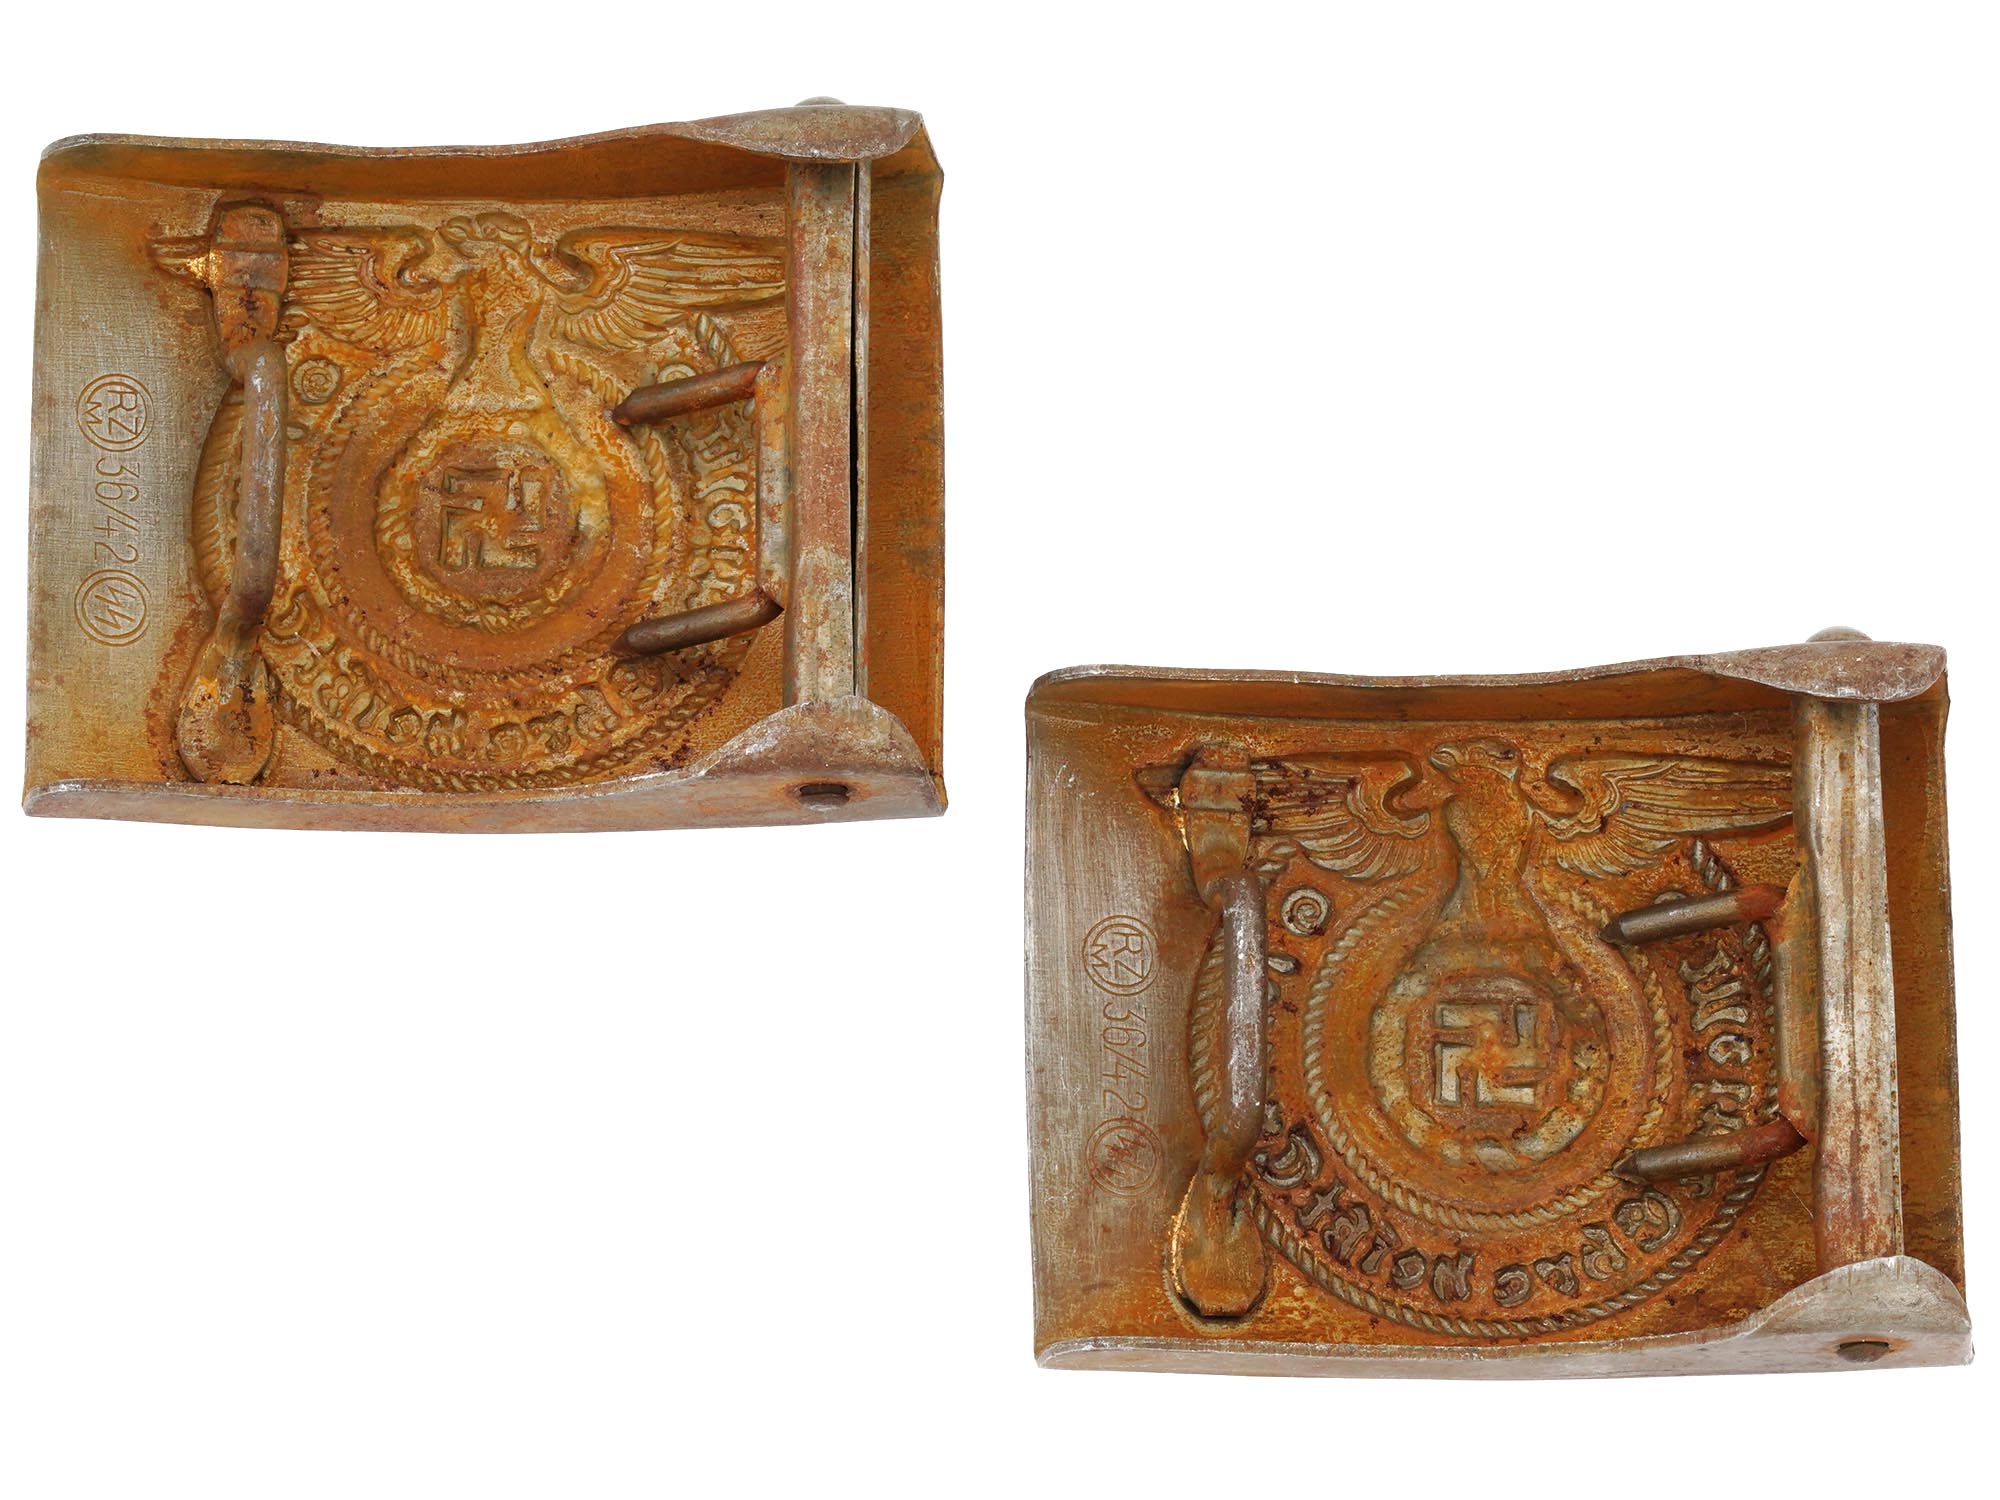 WWII NAZI GERMAN THIRD REICH ENLISTED BELT BUCKLES PIC-3